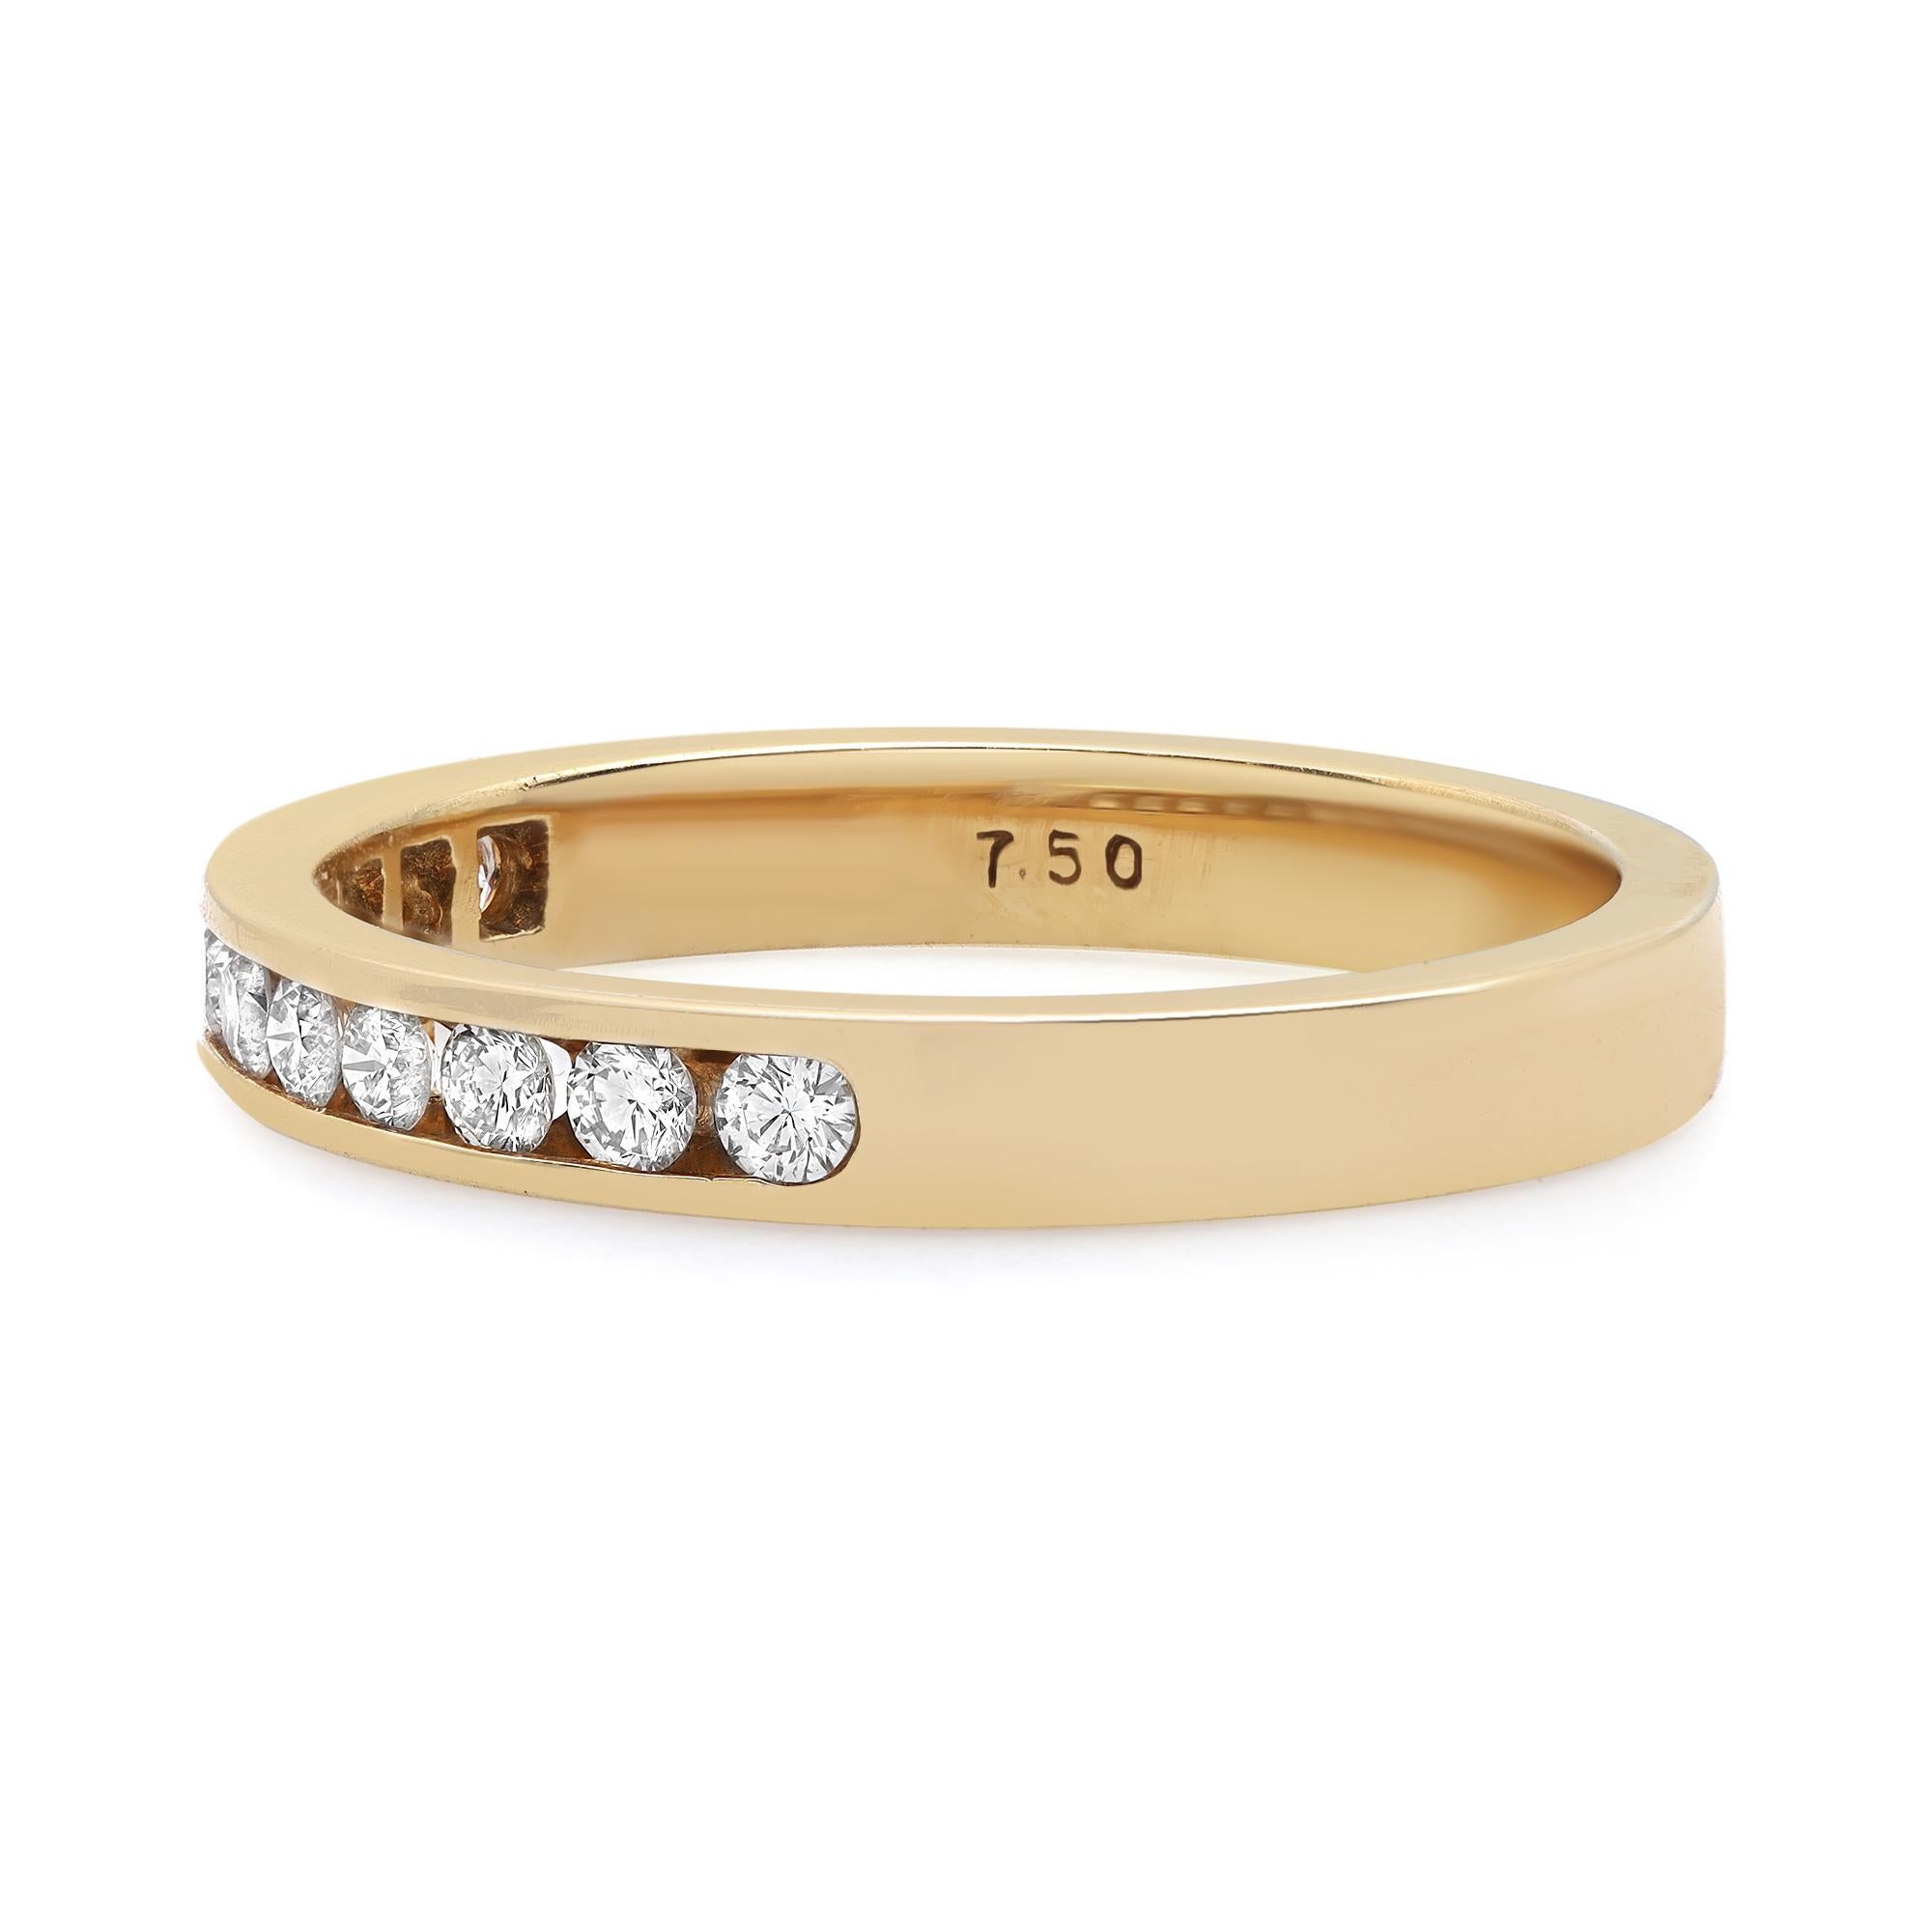 This beautiful diamond wedding band ring is a perfect fit for any occasion. Crafted in fine 18K yellow gold. It features 11 channel set round brilliant cut diamonds weighing 0.32 carat encrusted halfway through the band. Diamond color G-H and VS-SI